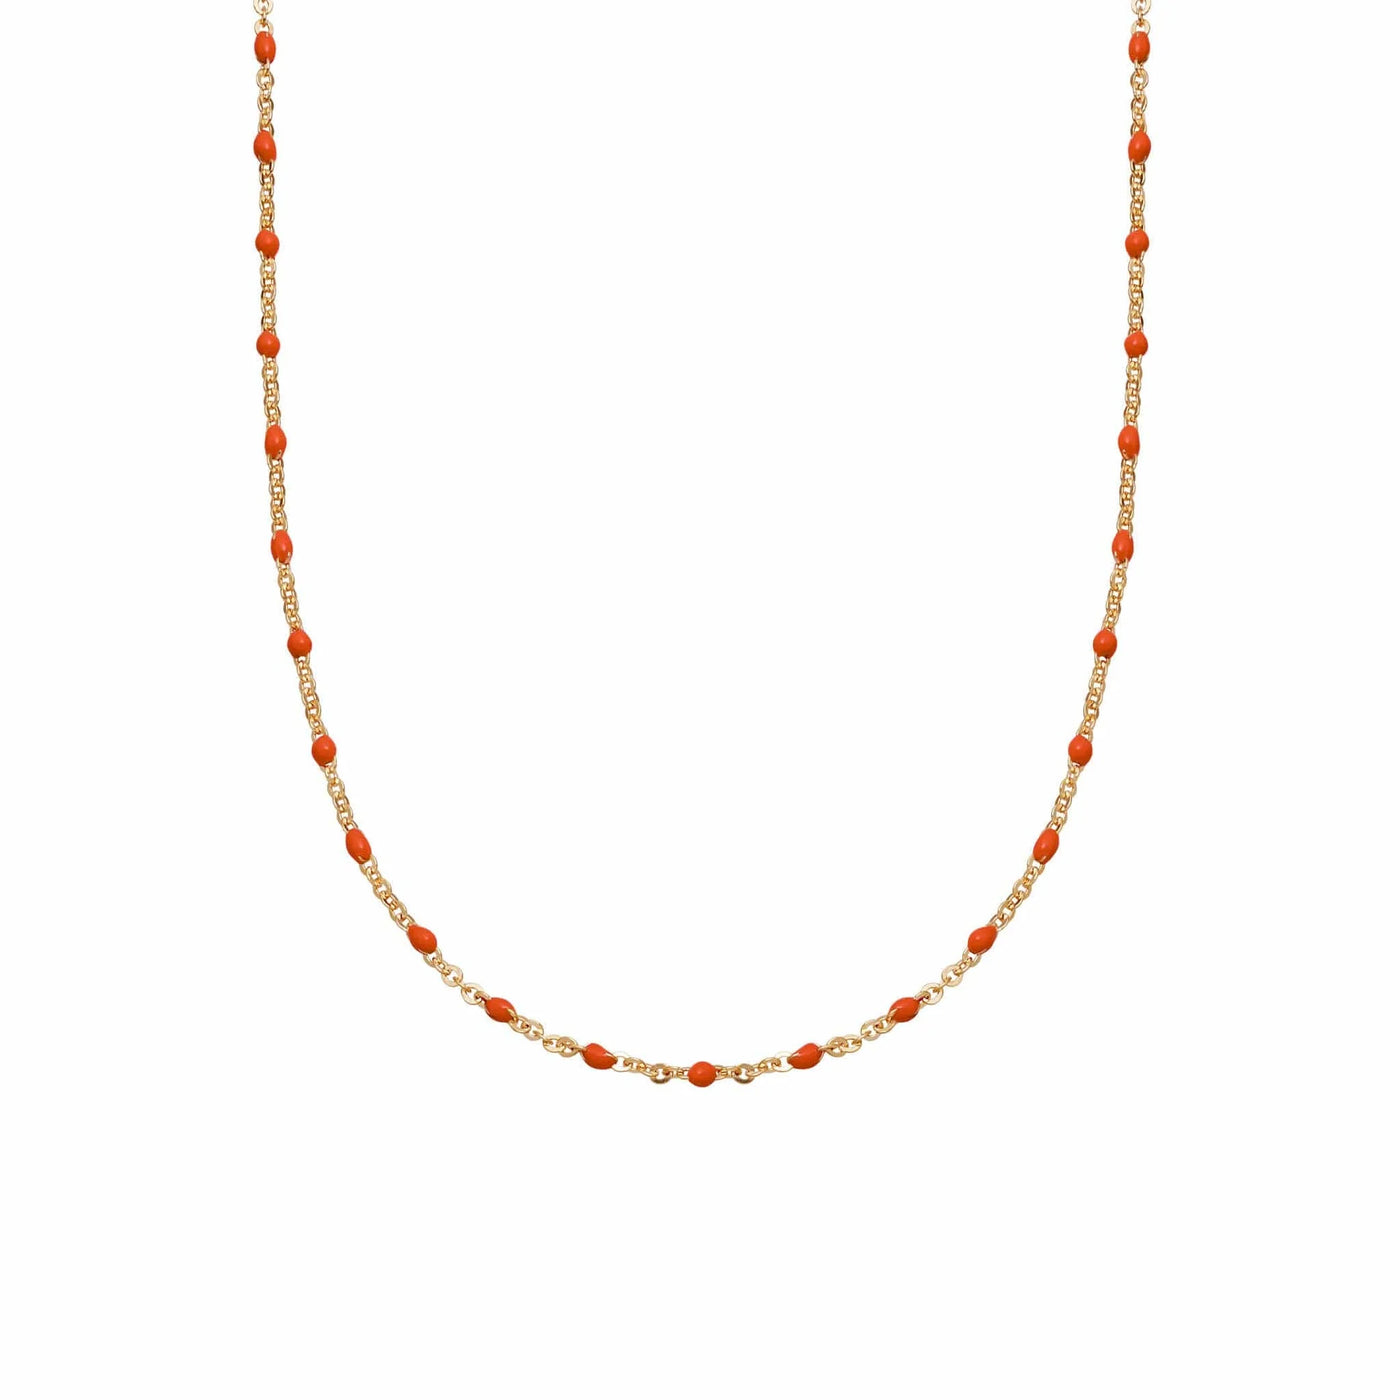 Daisy London Treasures Coral Beaded Necklace, Gold